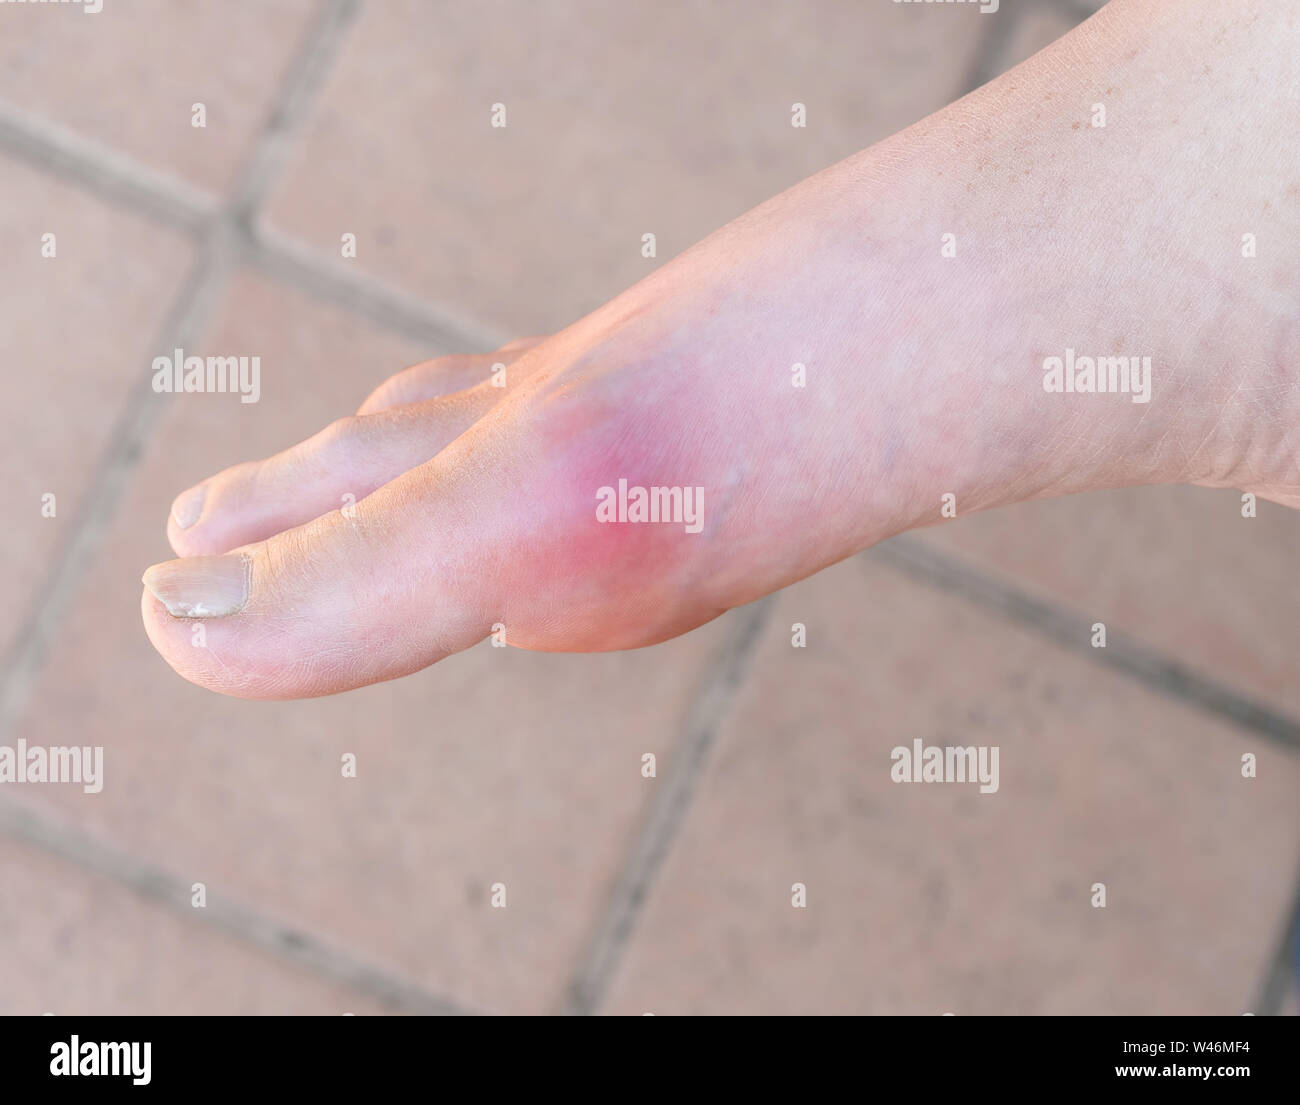 Man with painful gout inflammation on big toe joint. Stock Photo